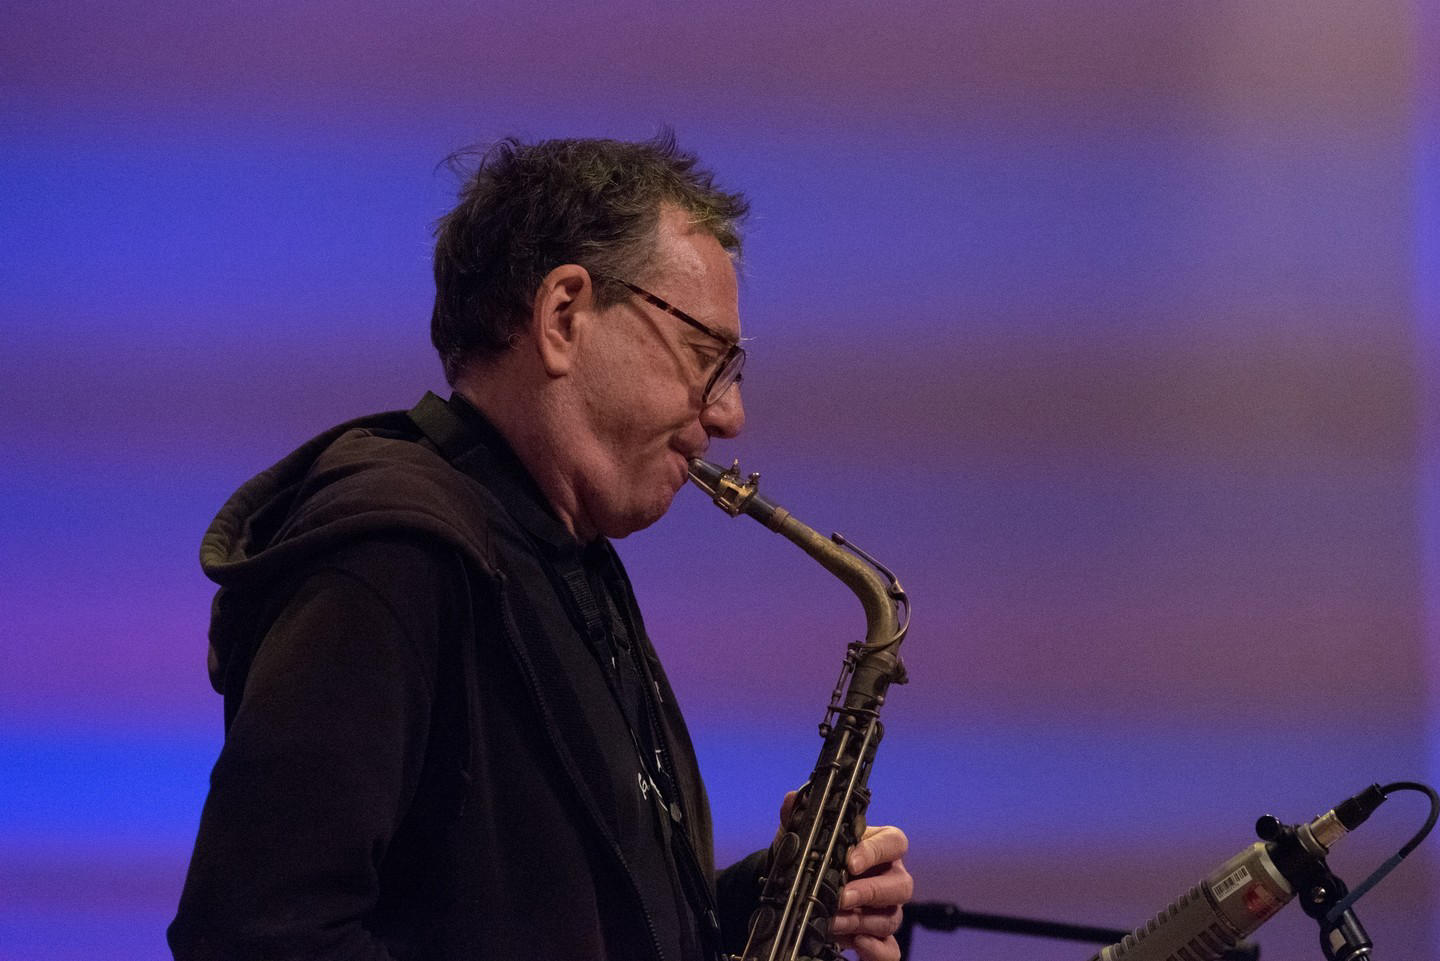 image  1 “This is not entertainment,” composer John Zorn declared during an onstage interview at the 2022 Big